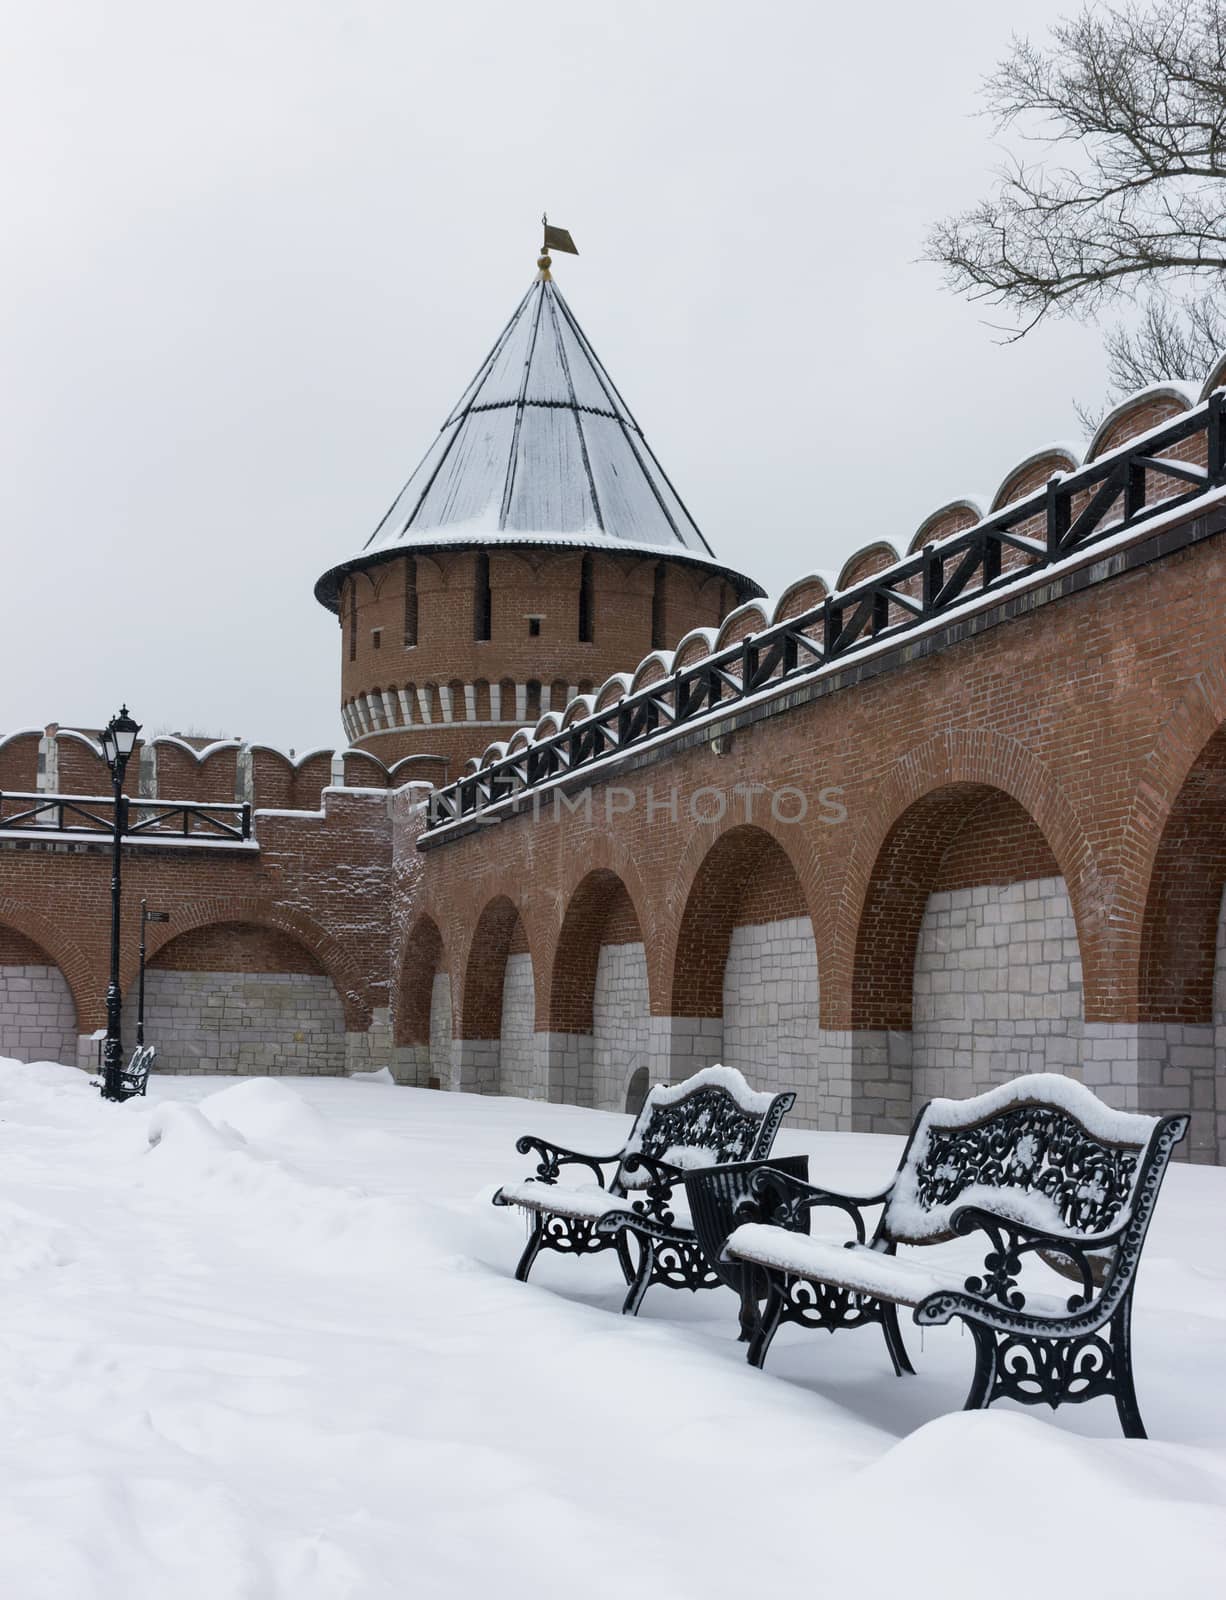 Architectural monument: Ivanovskaya tower of Tula Kremlin in winter 2018. by mb71ph